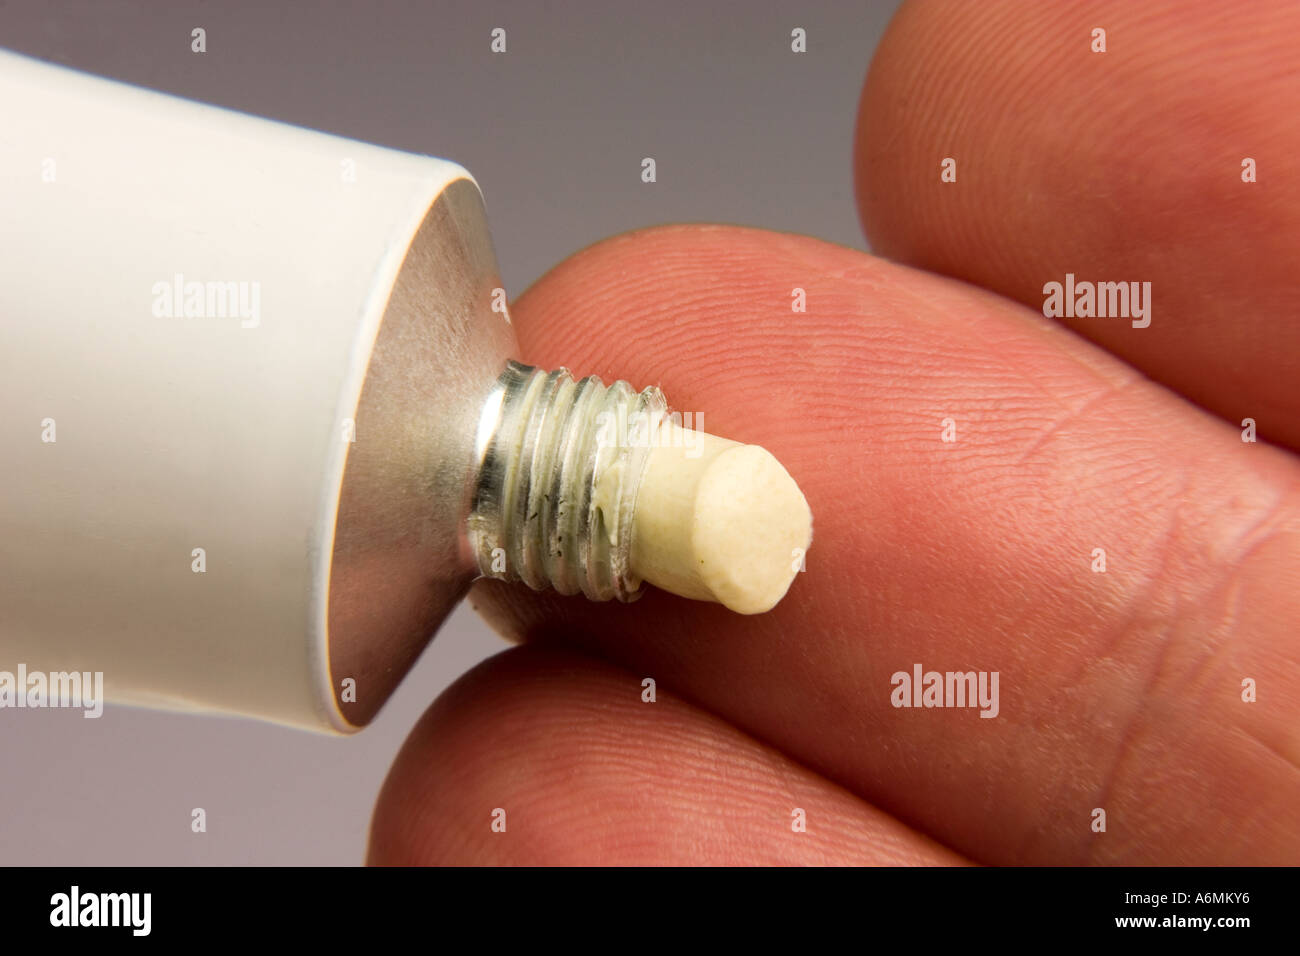 applying ointment or cream to fingertip Stock Photo